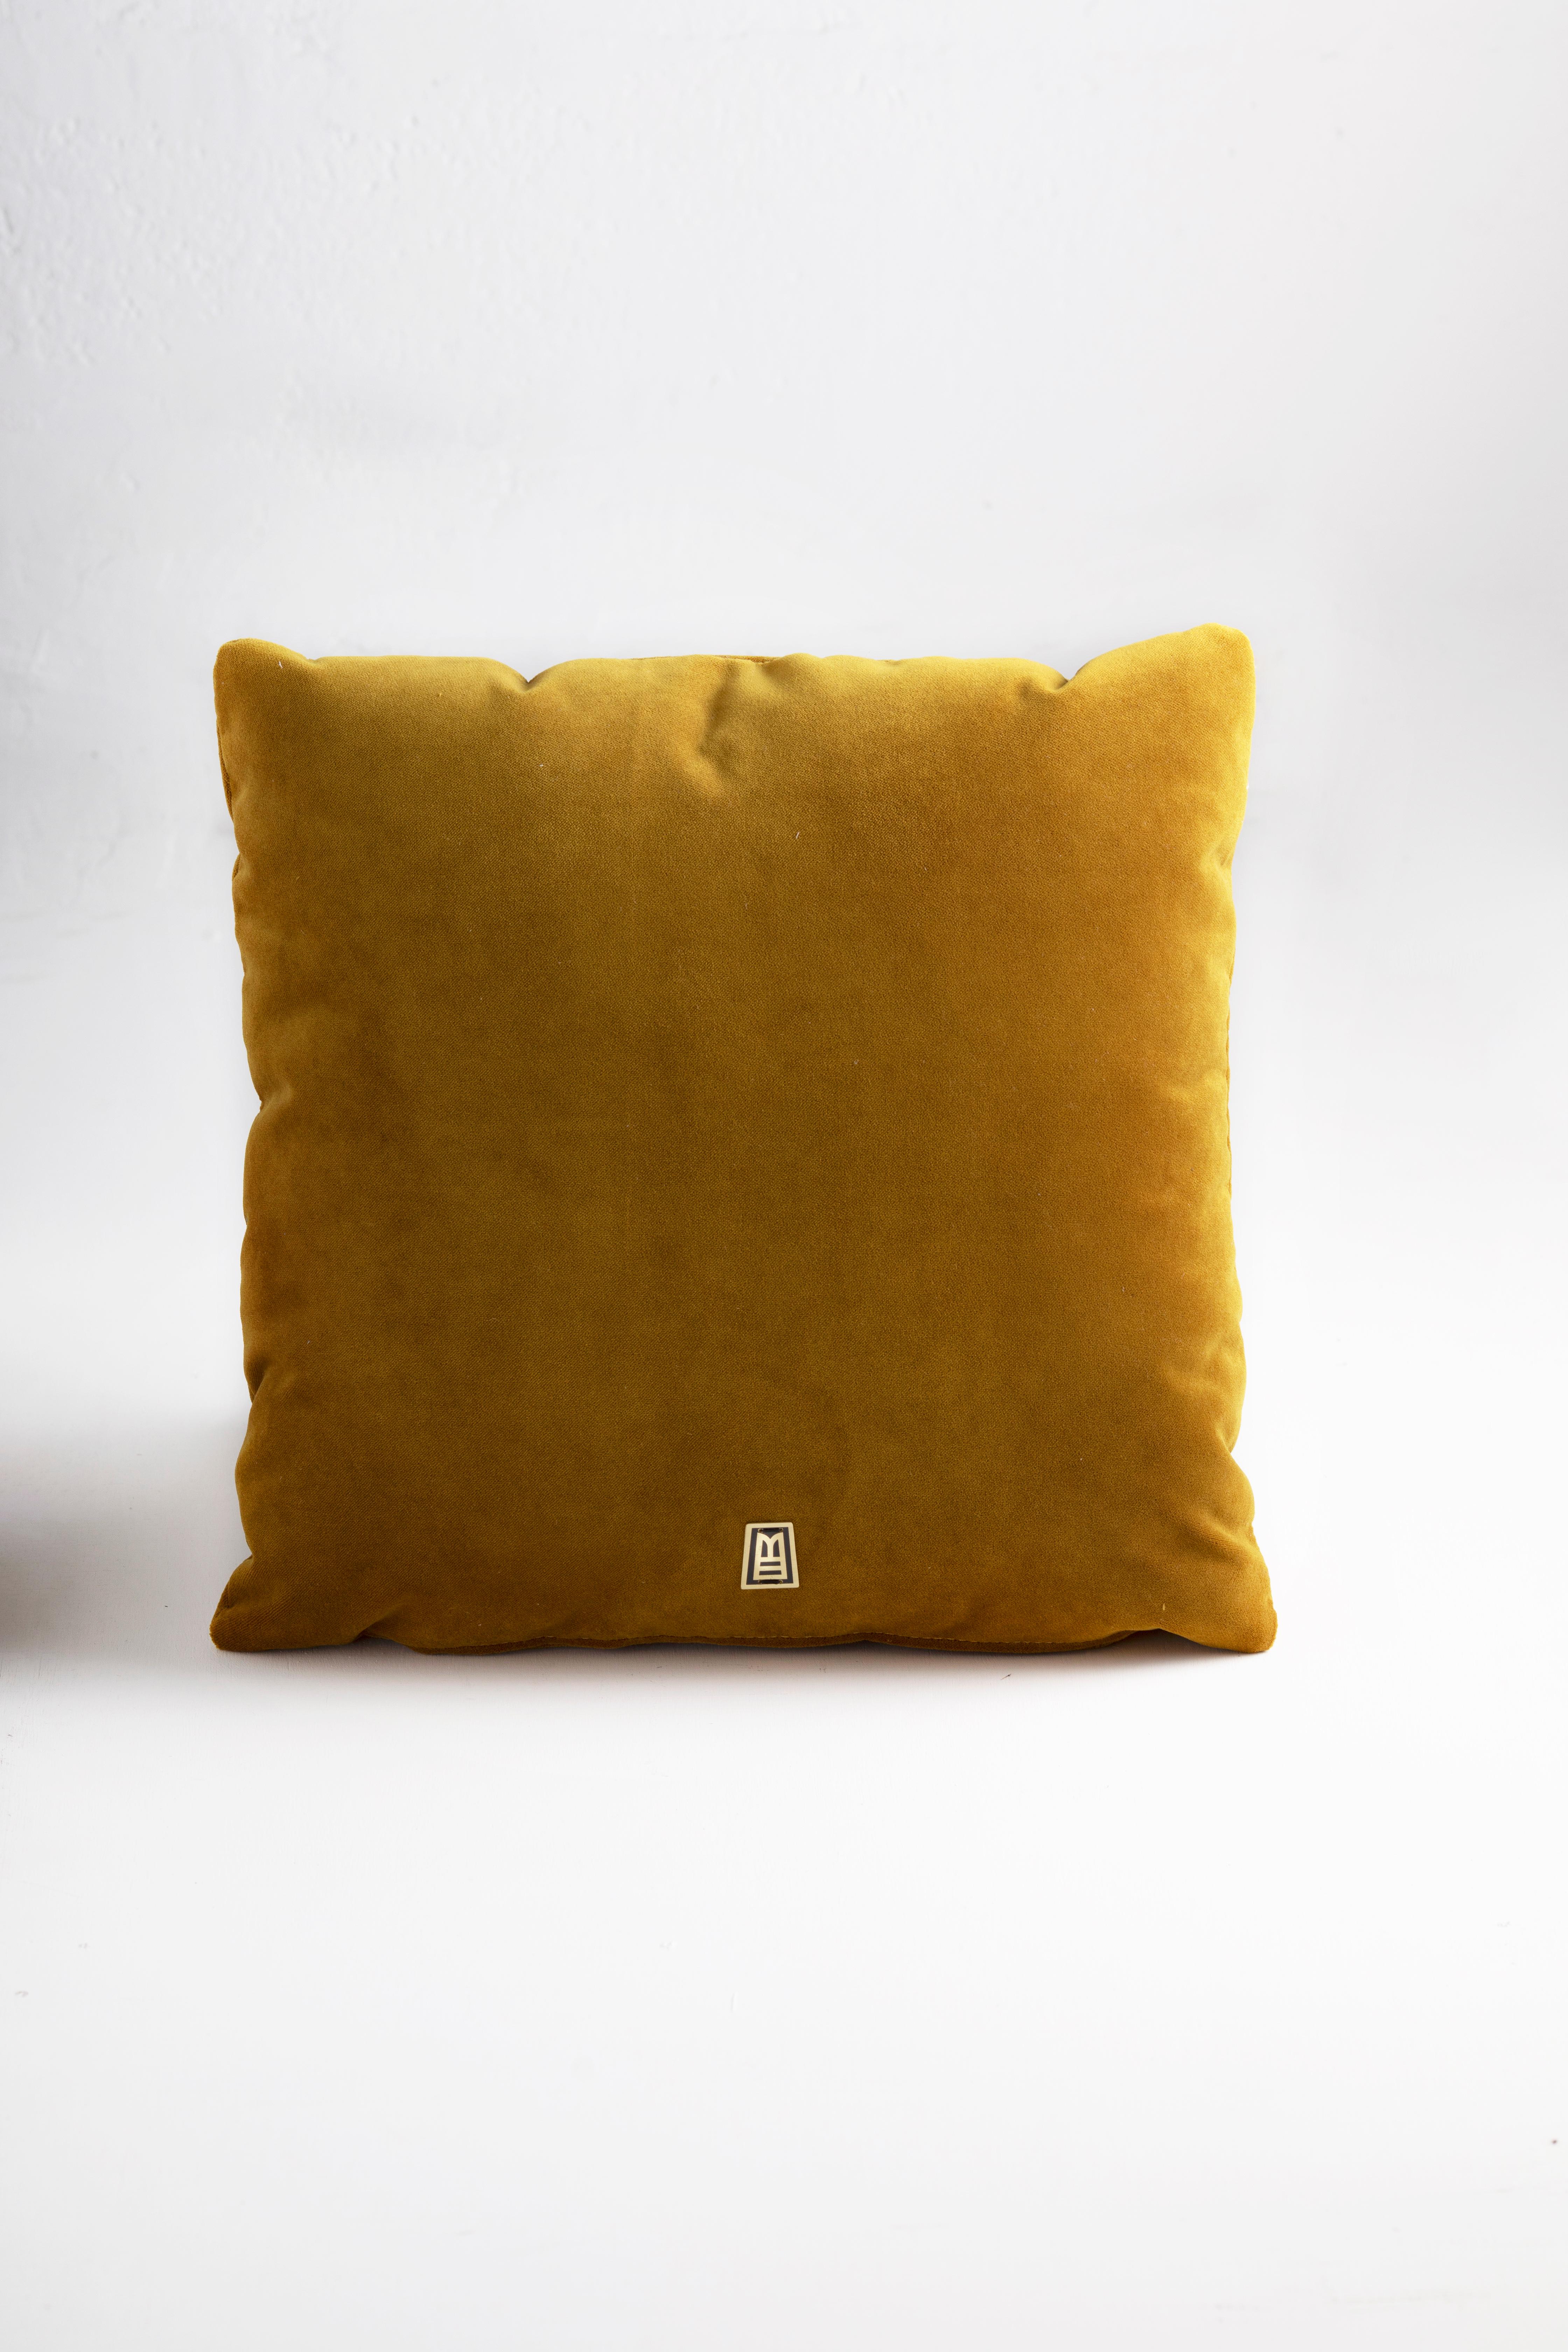 Ecuadorean LLAMA Hand Embroidered Decorative Pillows in Ochre Velvet by ANDEAN, Set of 2 For Sale